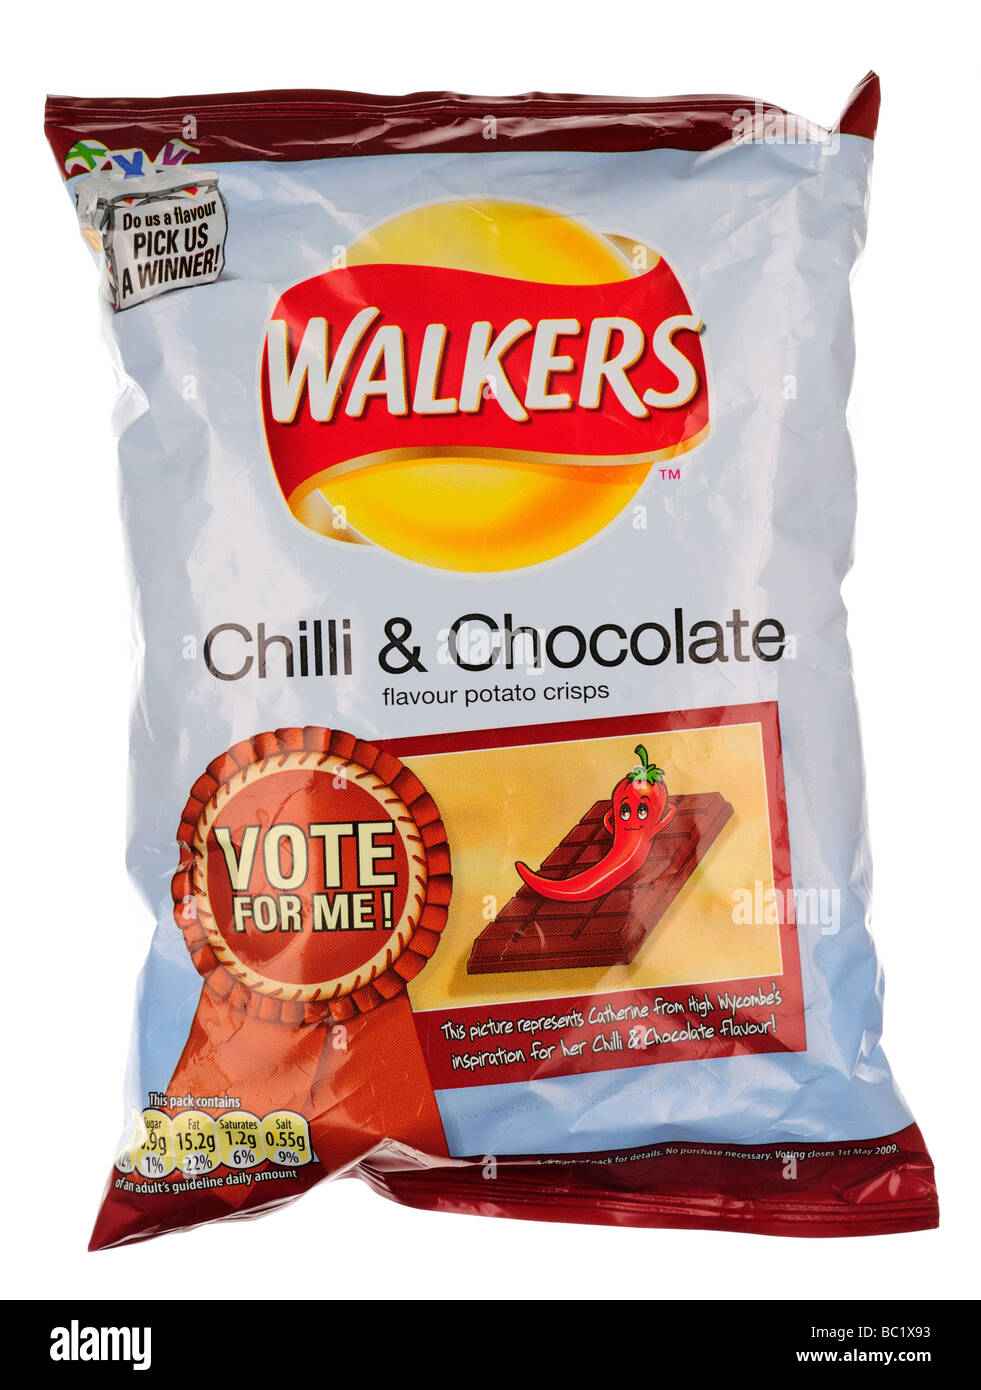 Packet of Walkers Chilli Chocolate Flavour Crisps Stock Photo - Alamy